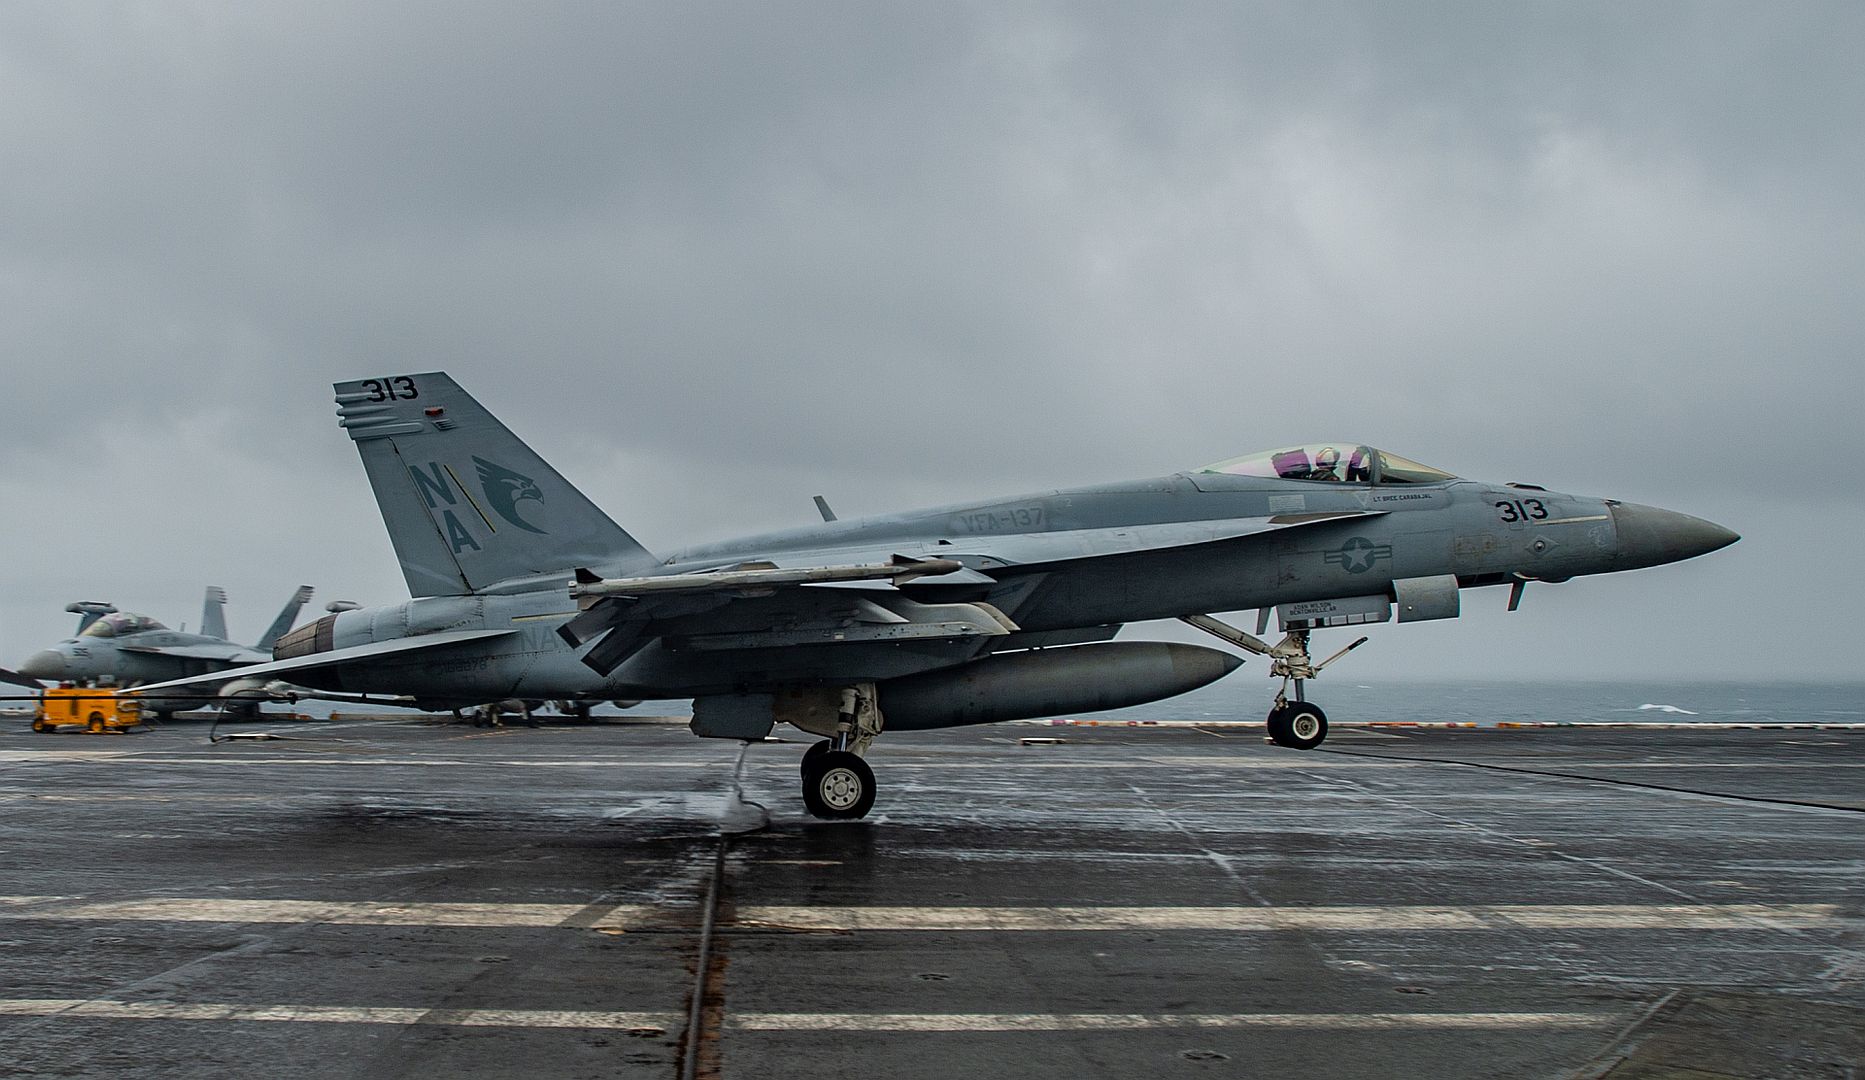 18E Super Hornet From The Kestrels Of Strike Fighter Squadron 137 Makes An Arrested Landing On The Aircraft Carrier USS Nimitz QuCQWkHdTSDdSYYKCN72M4